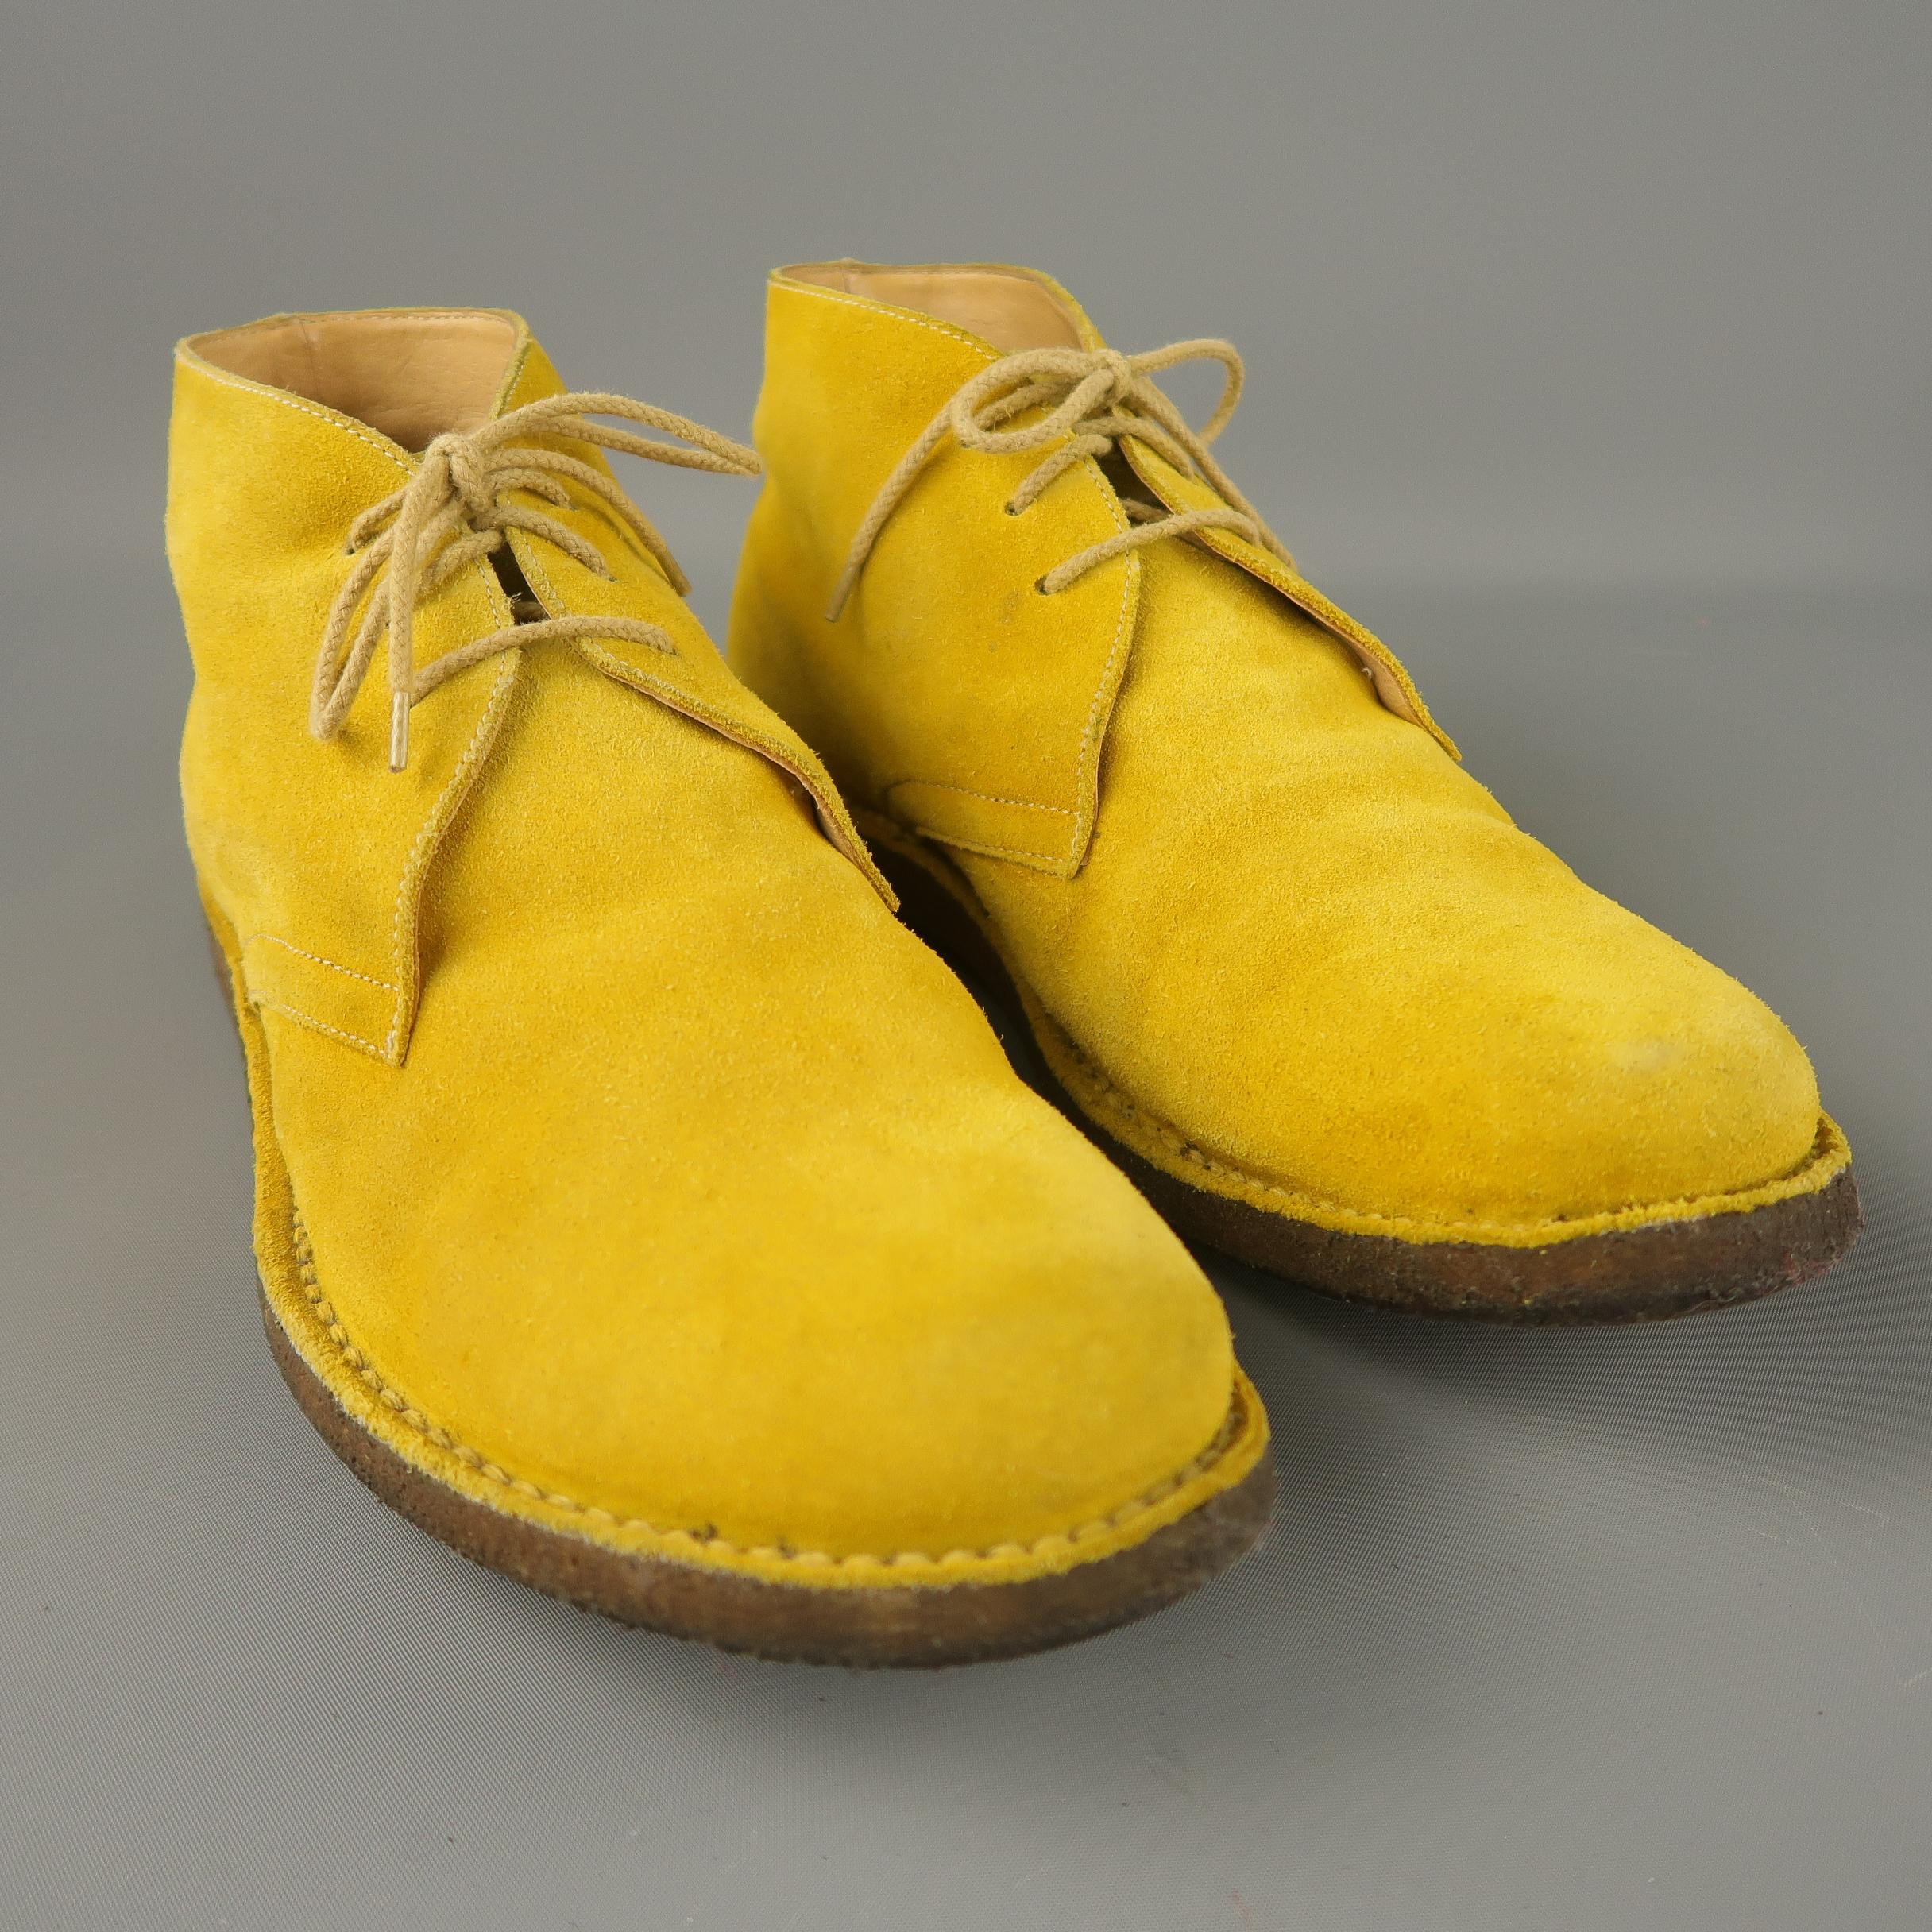 JIL SANDER desert boot comes in a yellow suede featuring a crepe sole. Made in Italy.
 
Very Good Pre-Owned Condition.
Marked: (No size)
 
Measurements:
 
Length: 12 in.
Width: 4.5 in.
Height: 4.9 in